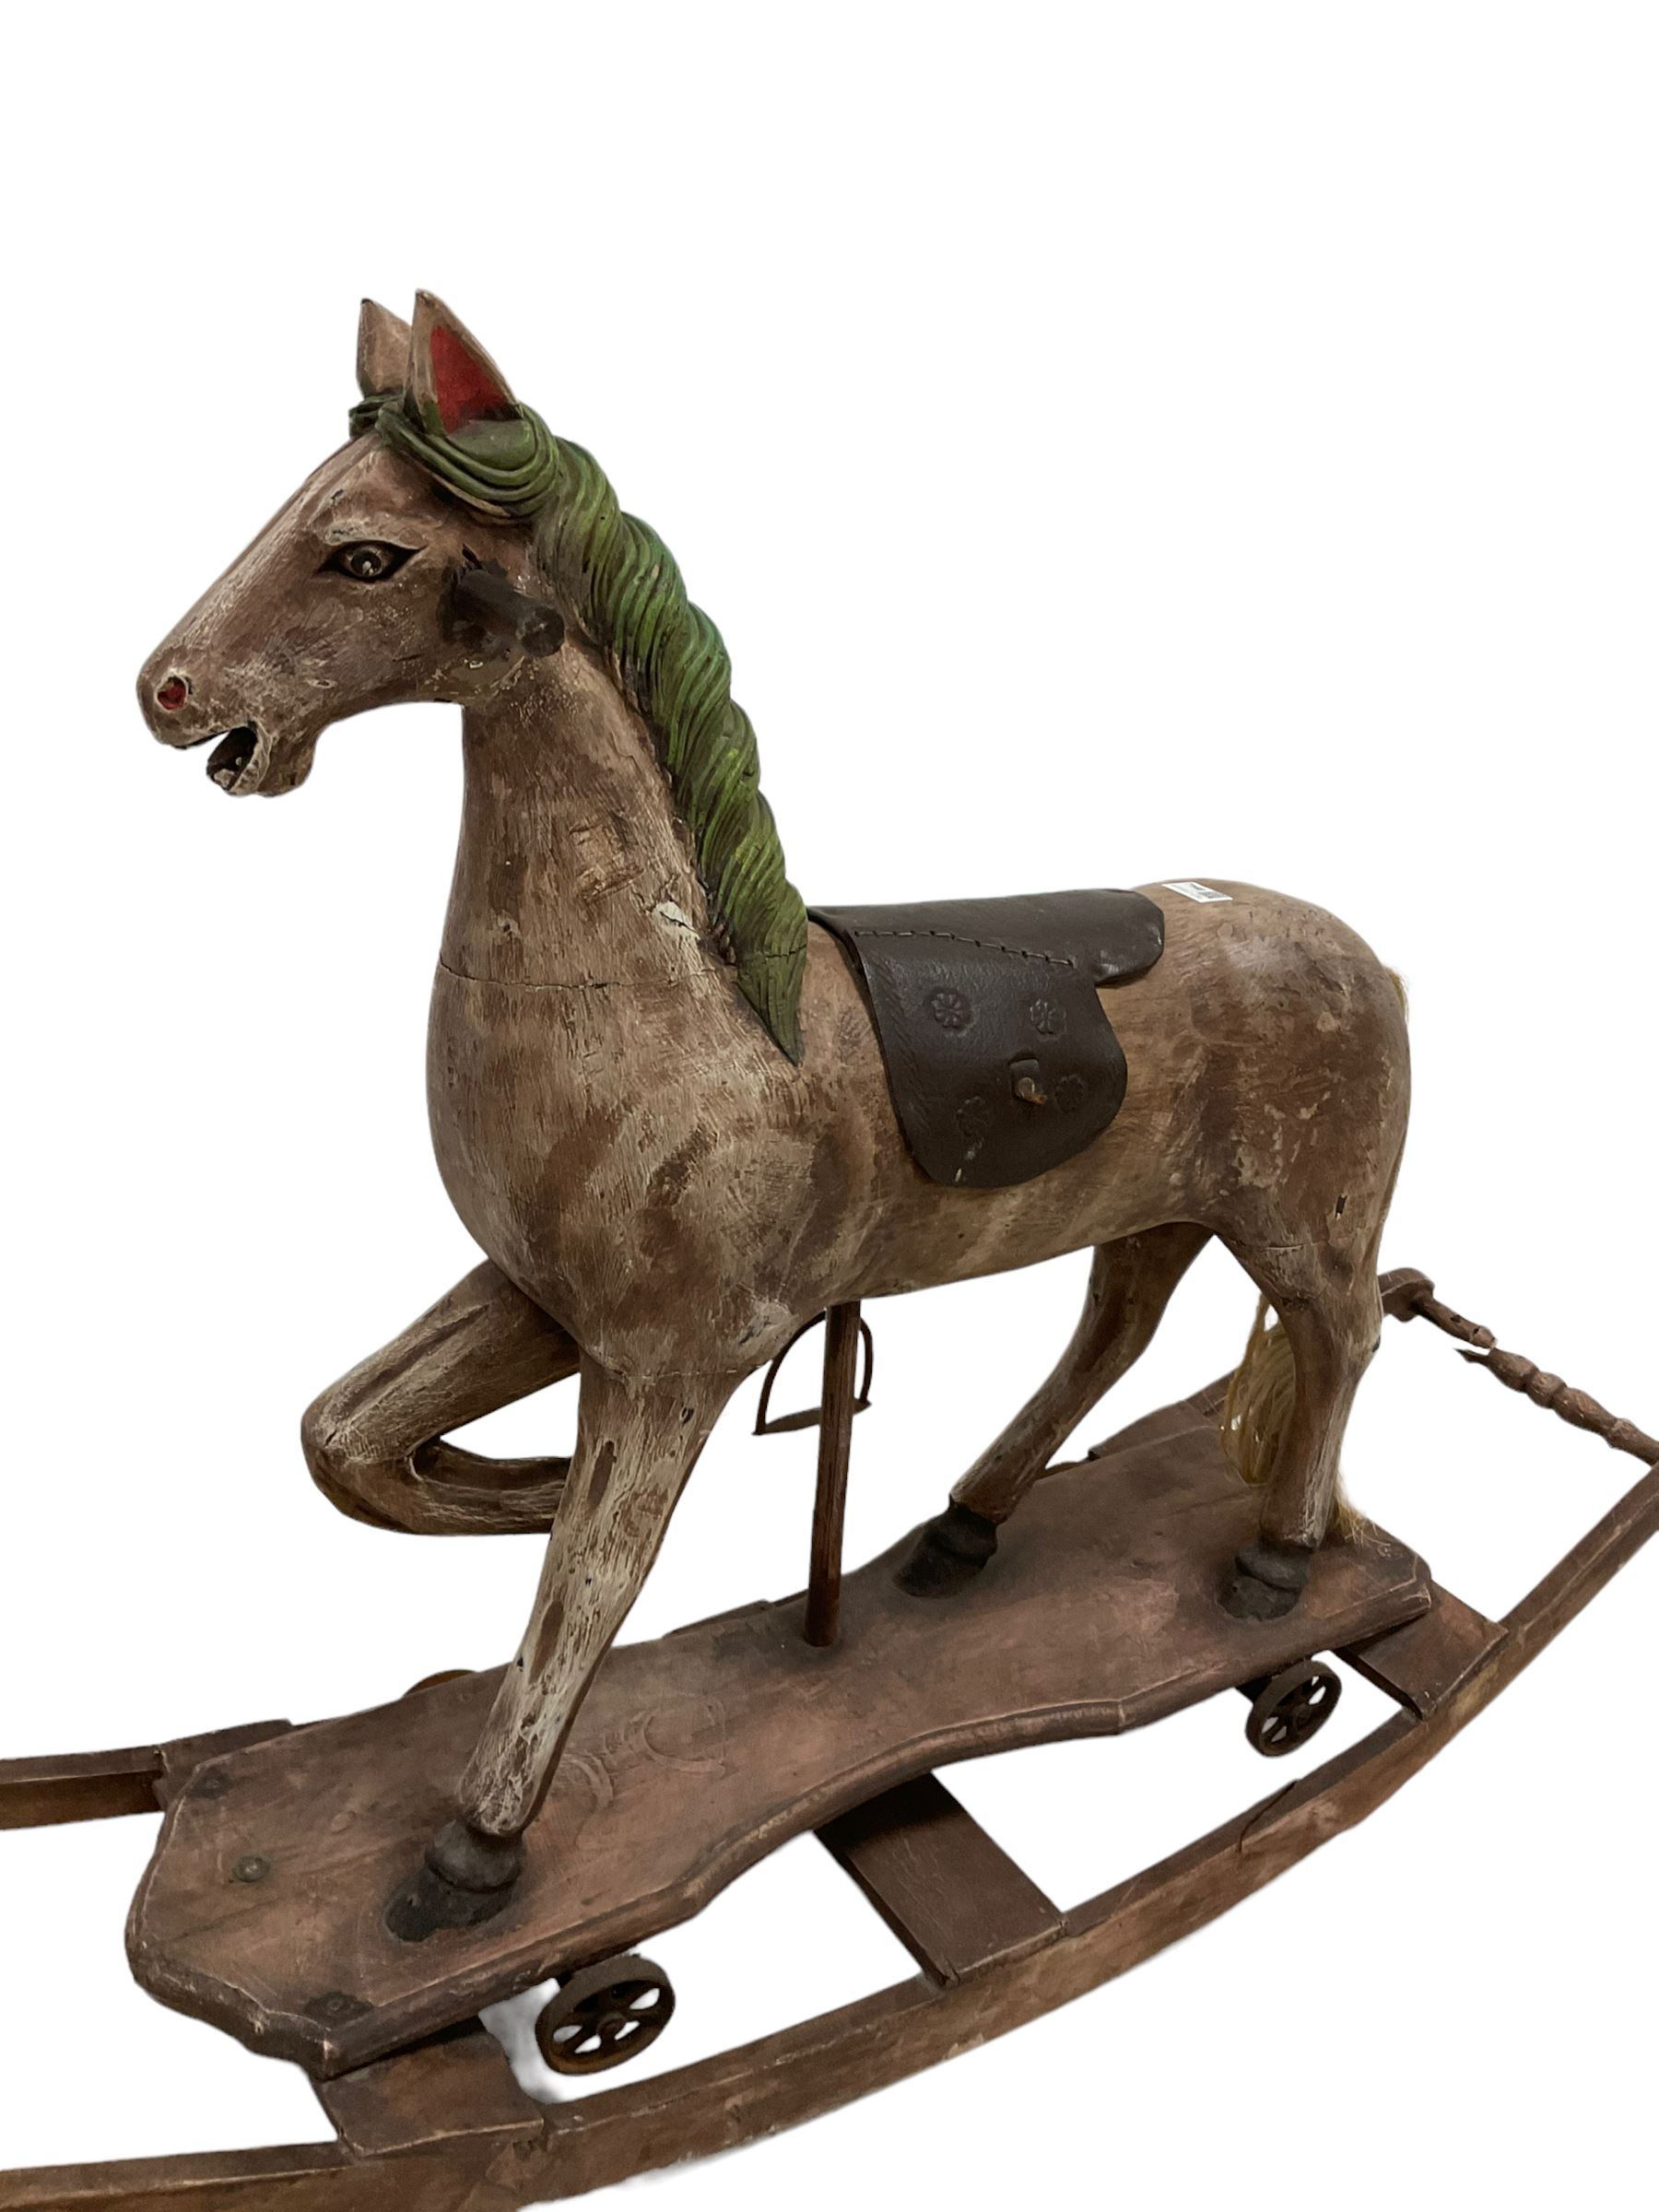 Small rocking horse - Image 3 of 4